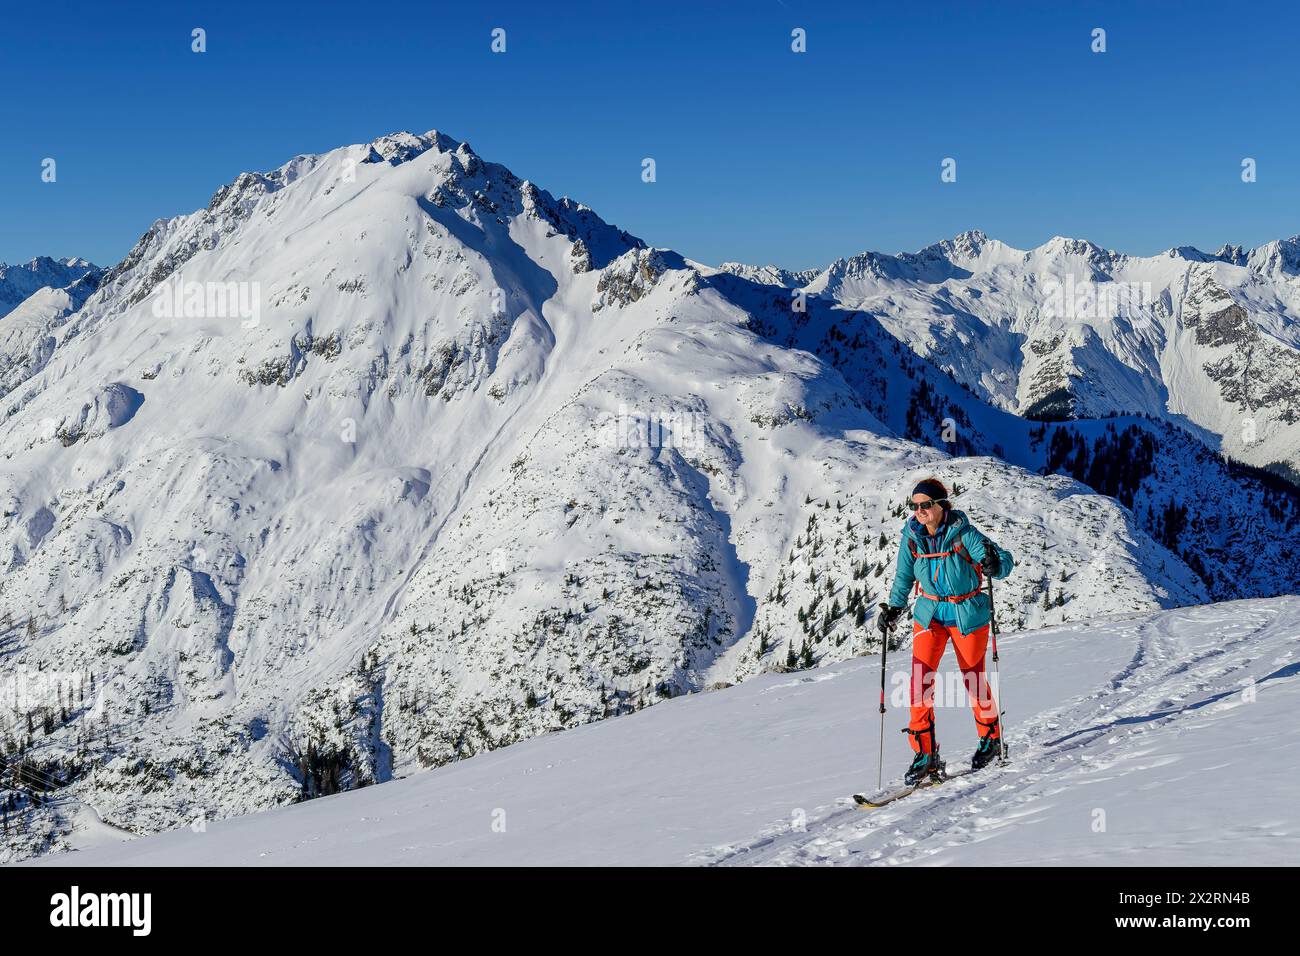 Mature woman back country skiing on Gruenstein with Lechtal Alps in background, Mieming Range, Tyrol, Austria Stock Photo